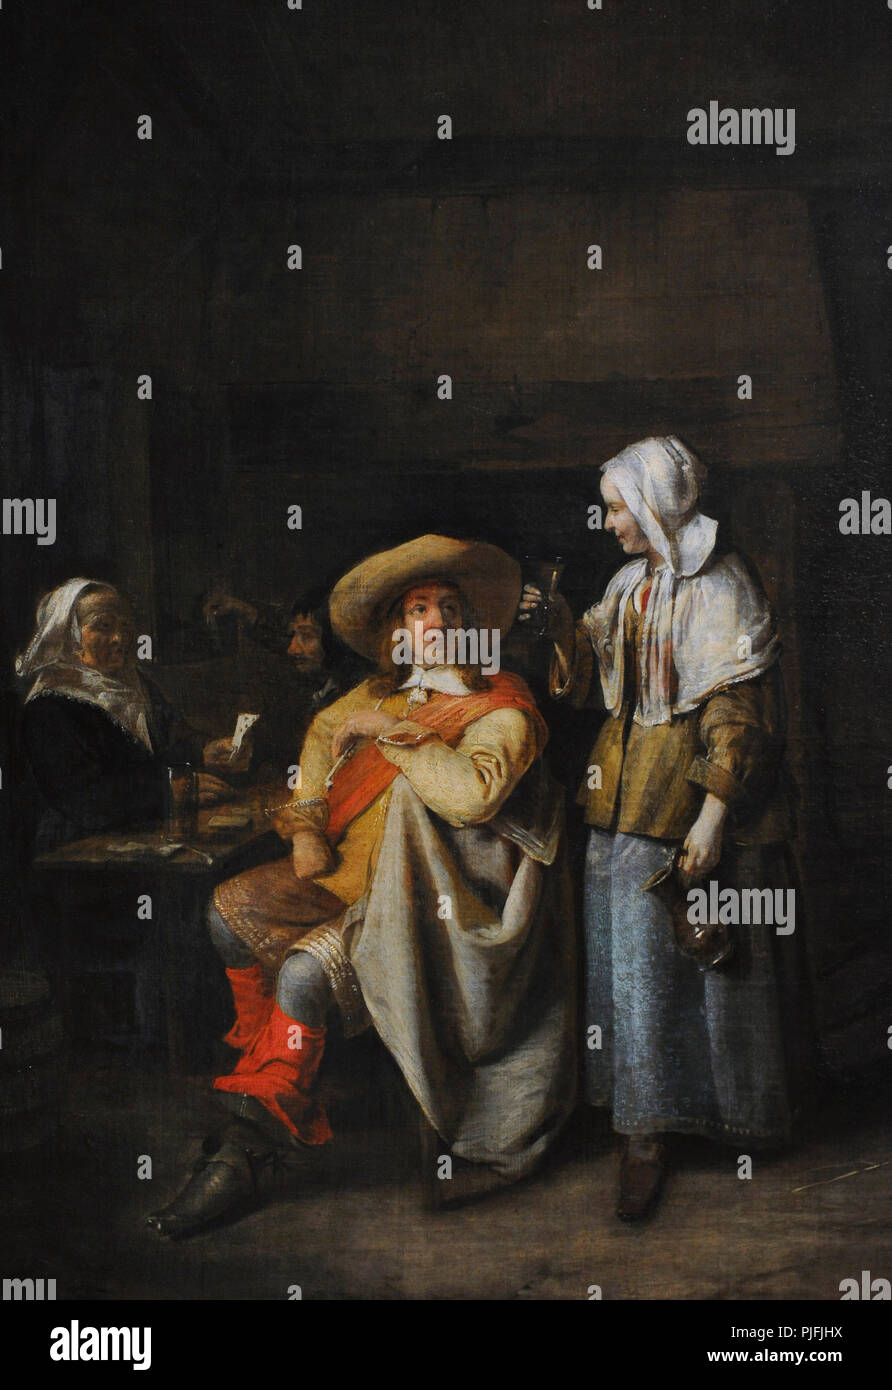 Pieter de Hooch (1629-1684). Dutch Golden Age painter. Officer and Two Card Players, 1652-1655. Detail. Wallraf-Richartz Museum. Cologne. Germany. Stock Photo